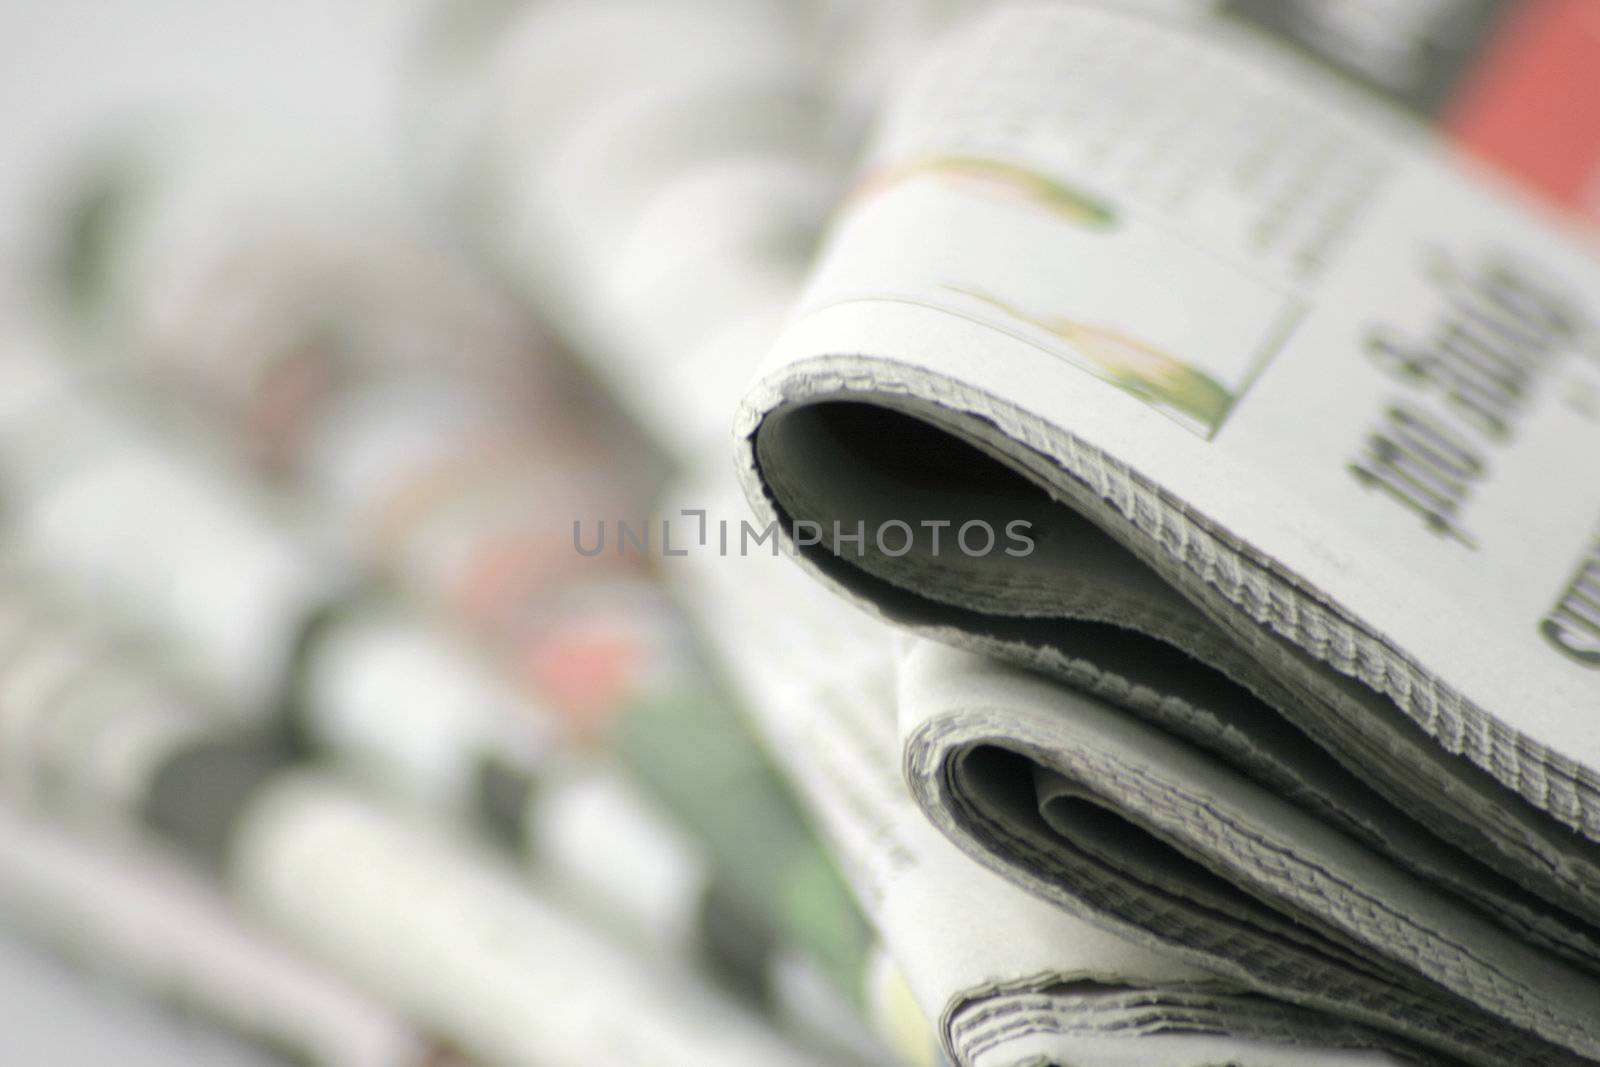 newspapers by leafy